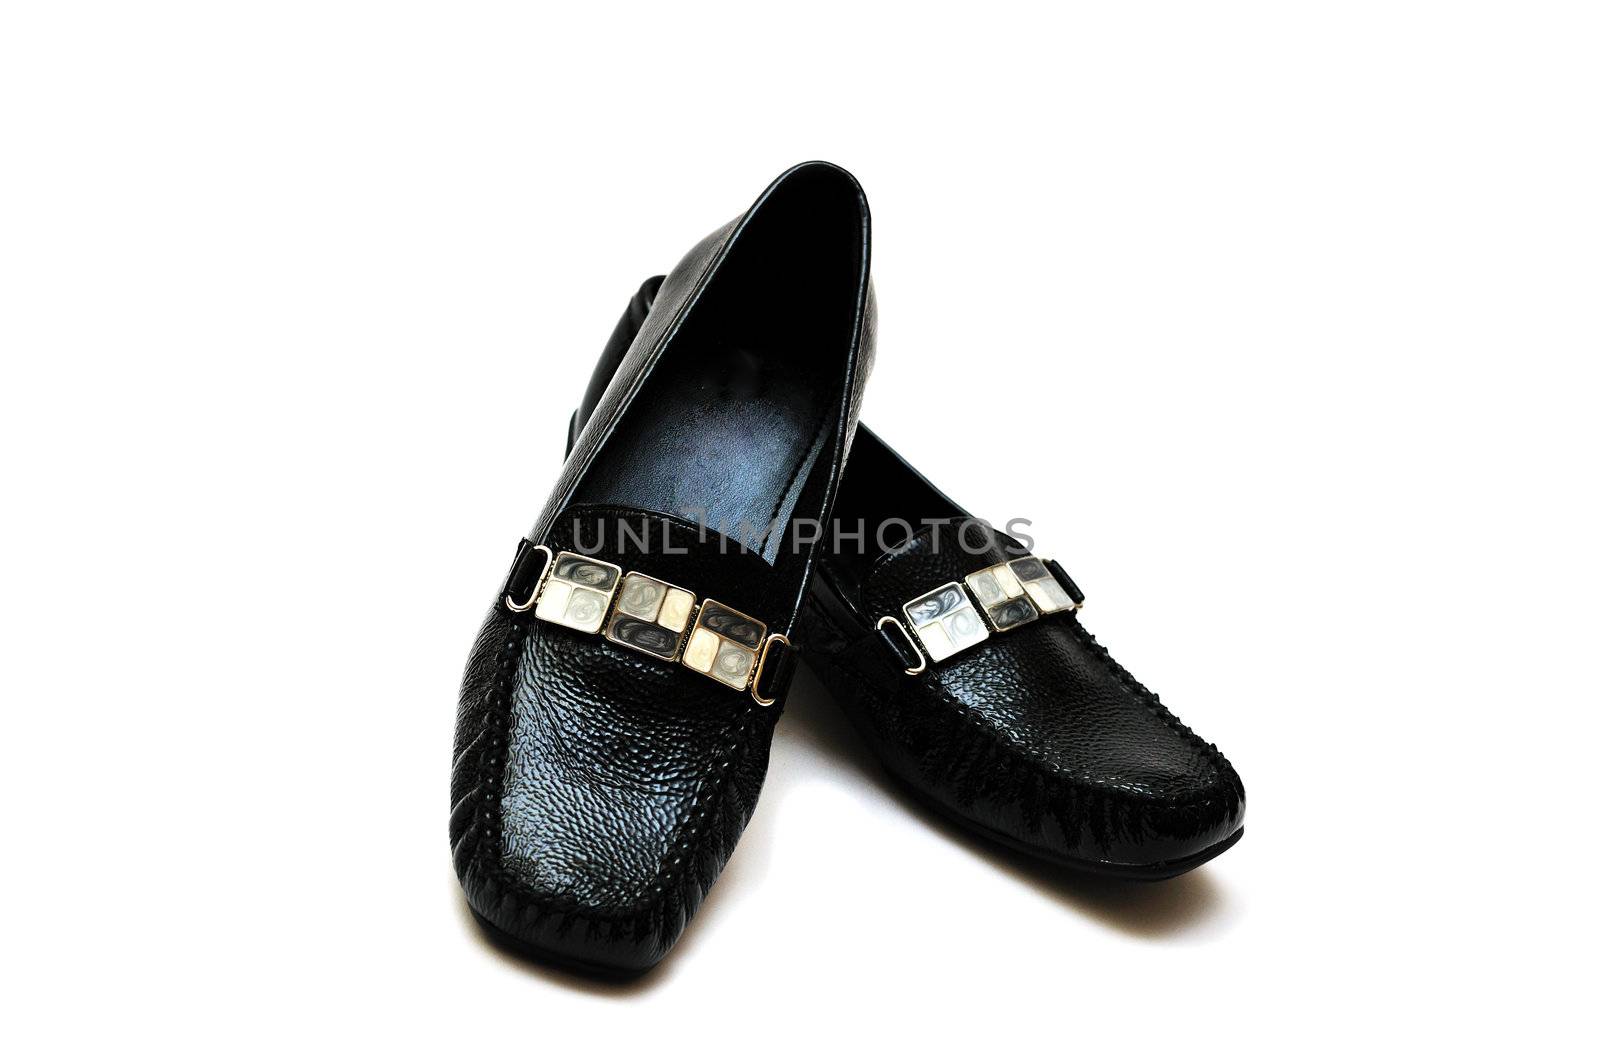 black leather women shoes by Reana